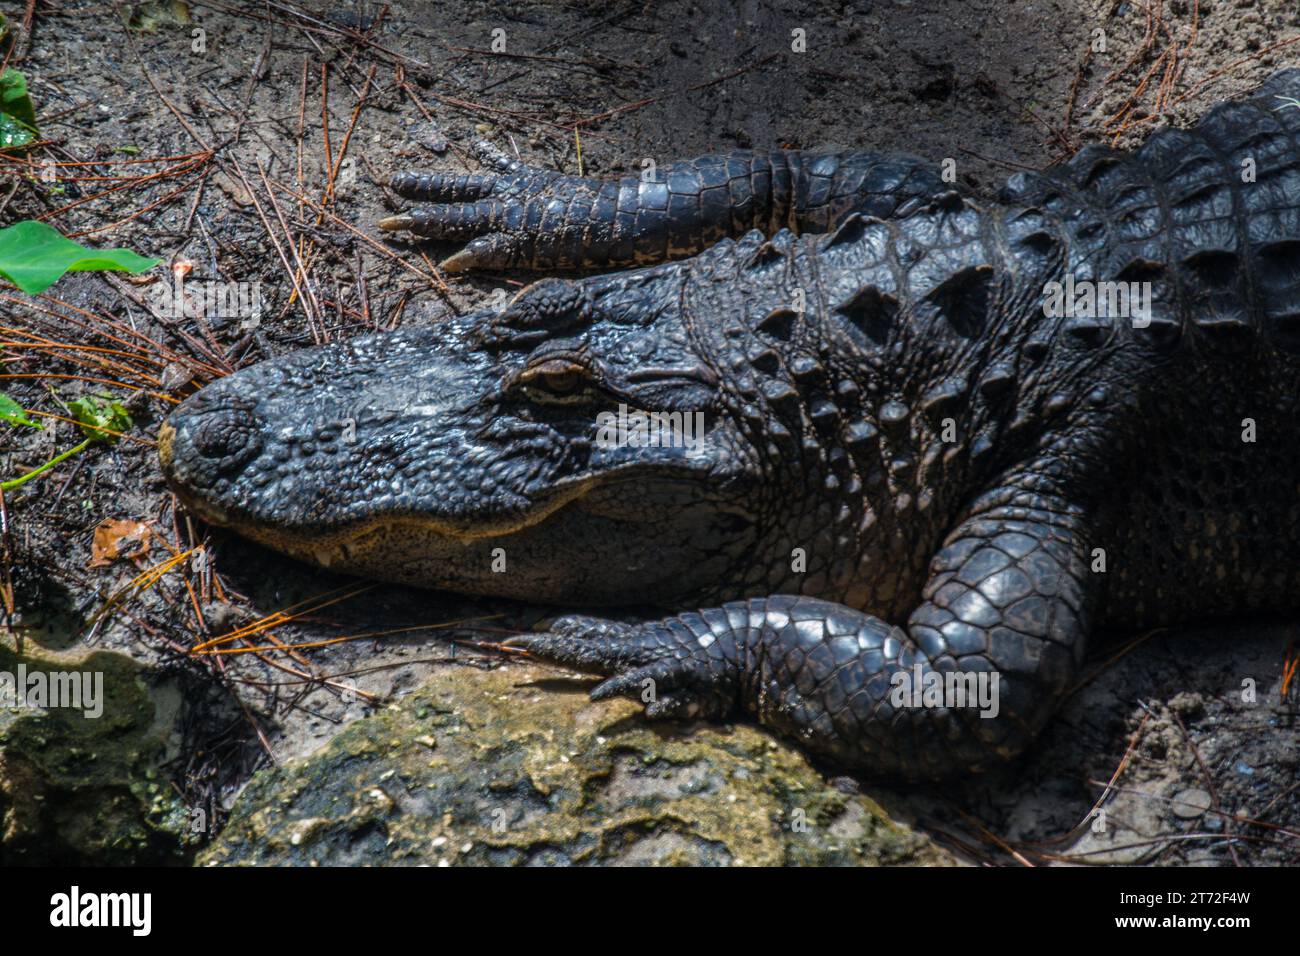 Close up of an Alligator from above Stock Photo